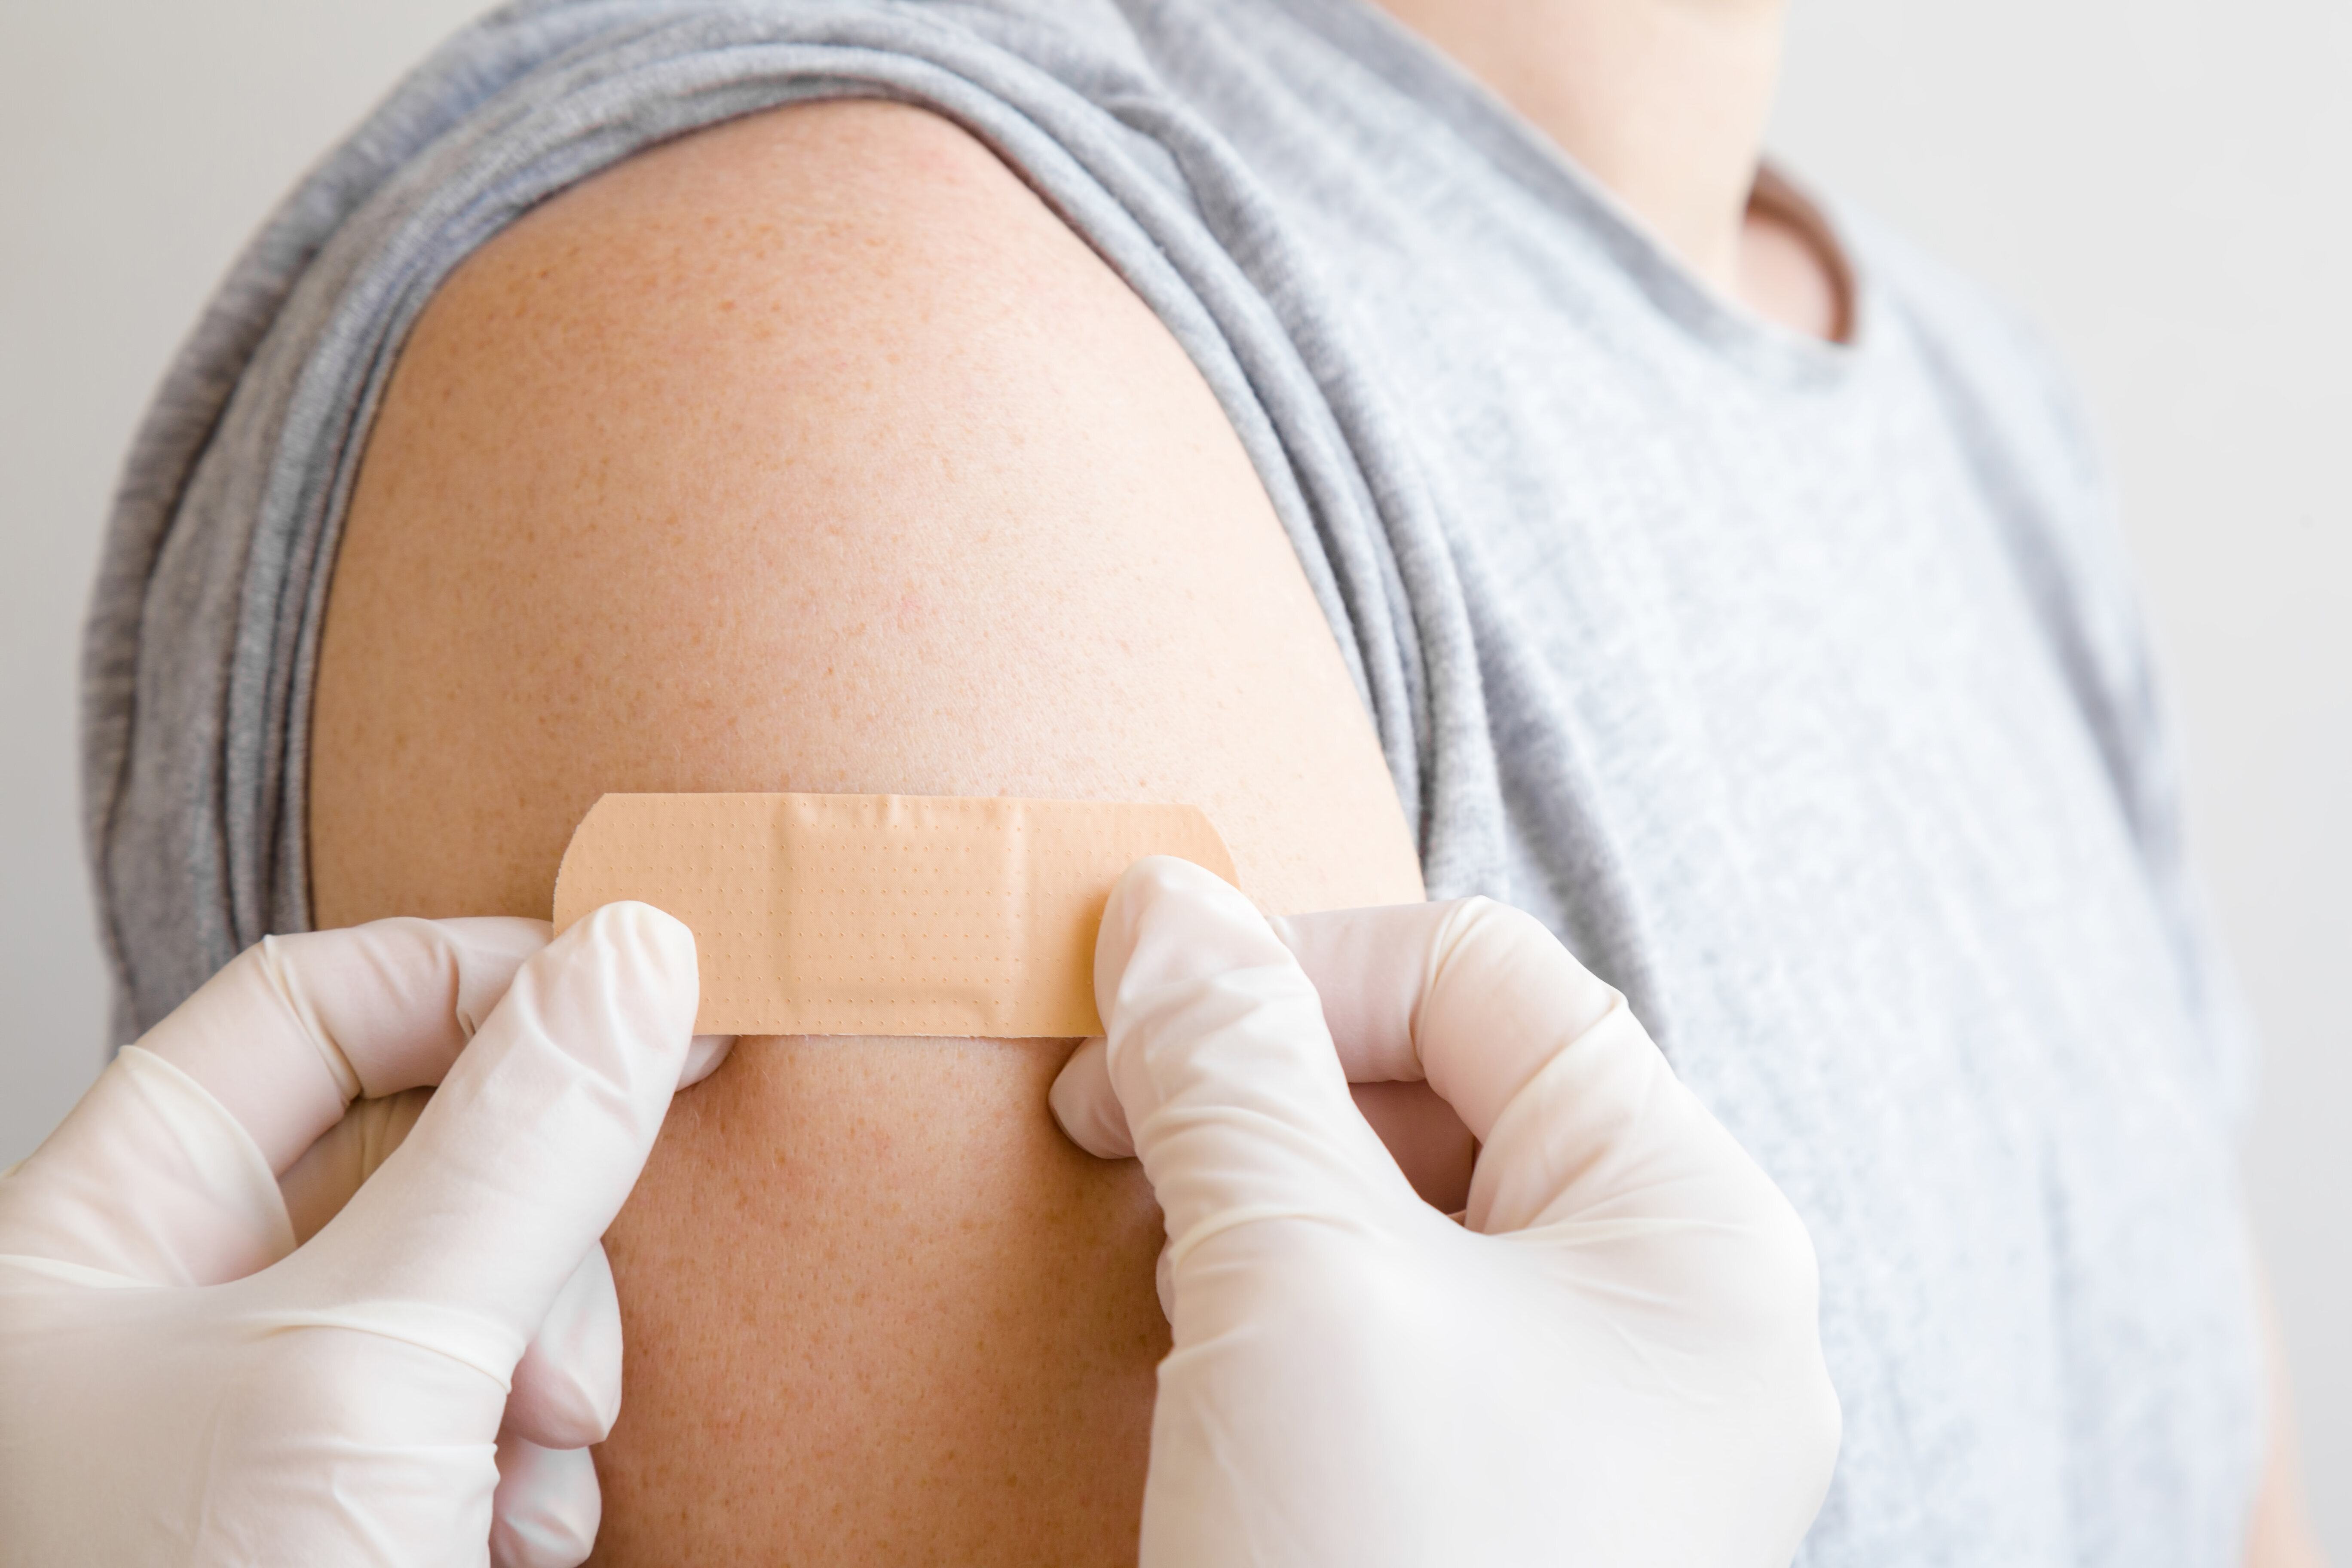 Thereâ€™s A Good Reason Why The Flu Shot Hurts So Much